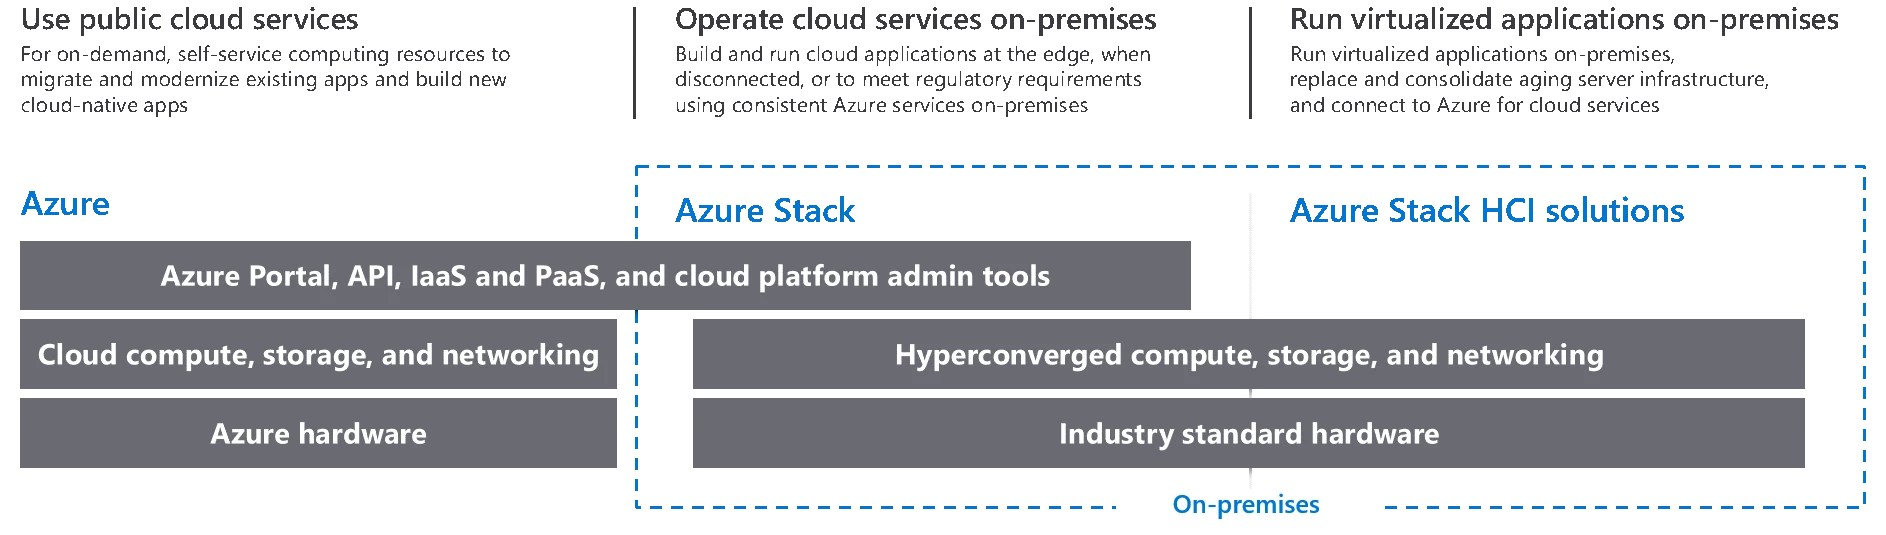 Azure Stack HCI solutions